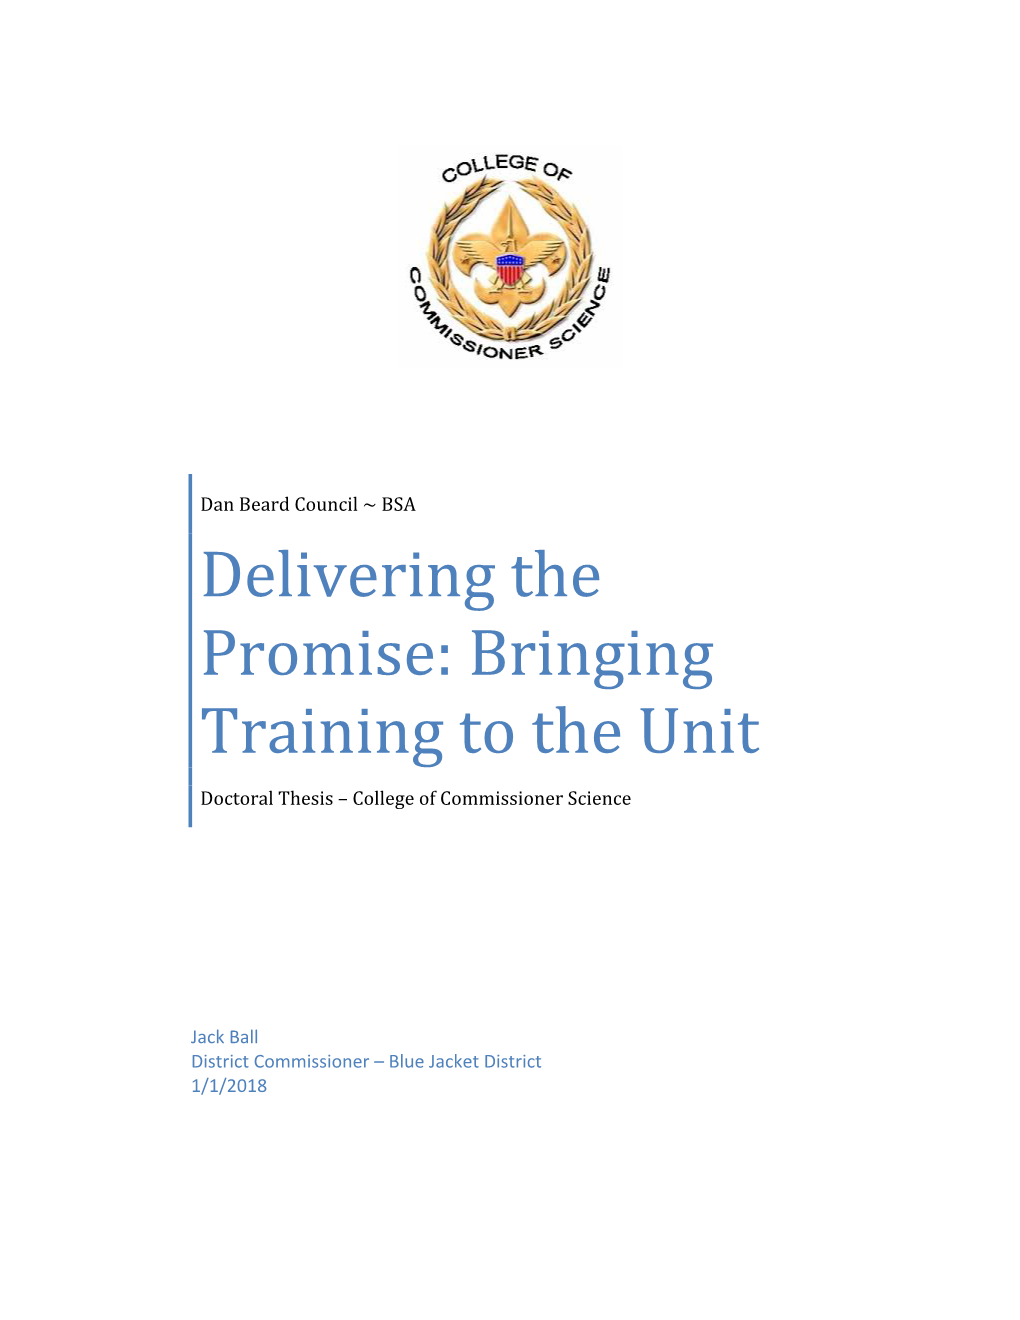 Delivering the Promise: Bringing Training to the Unit